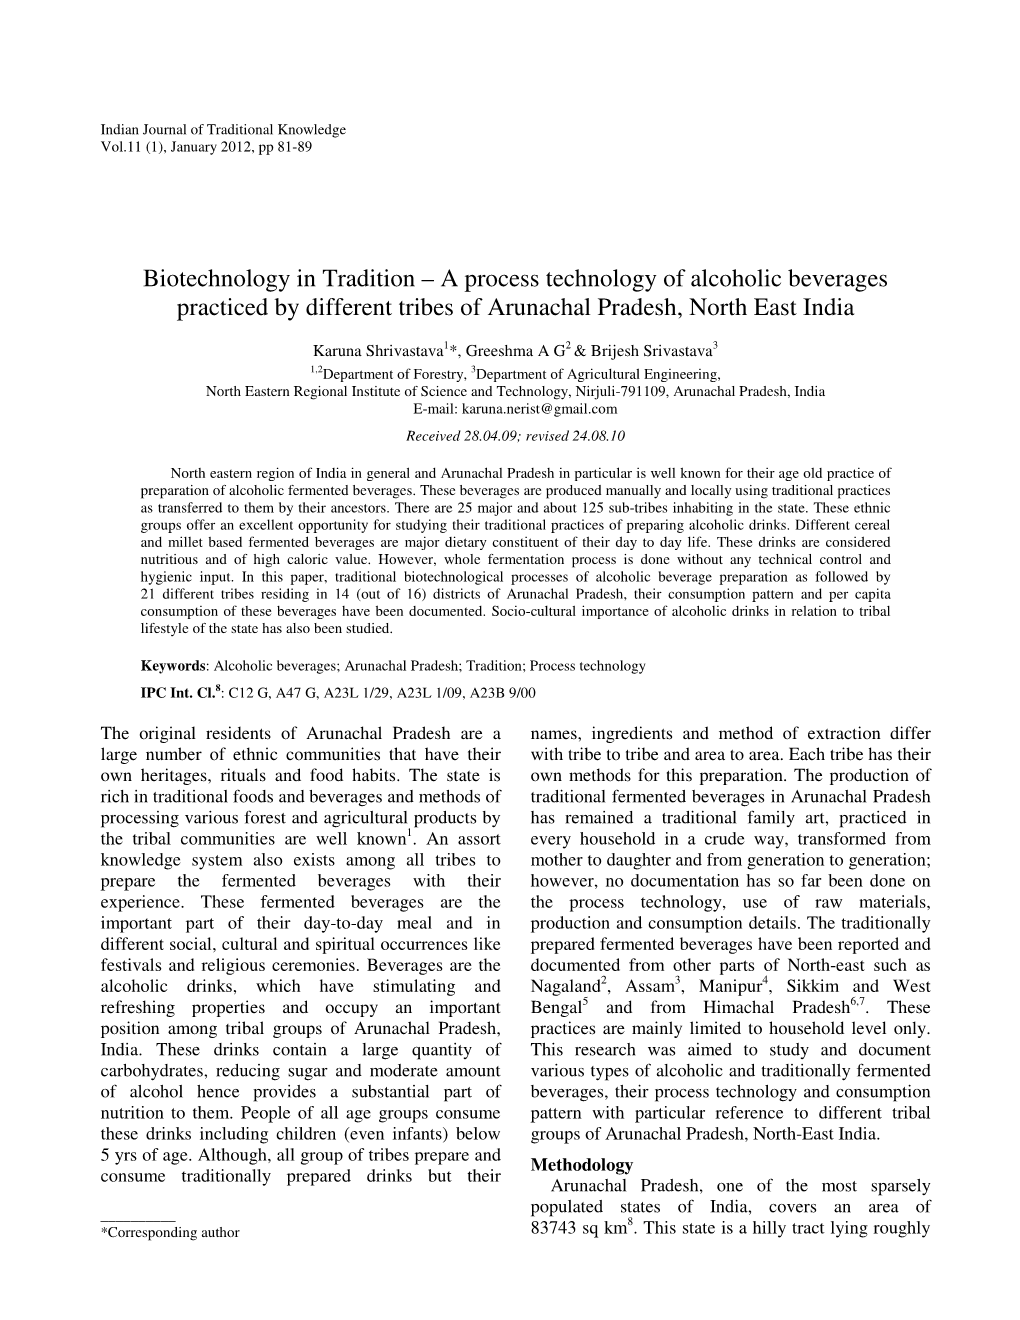 A Process Technology of Alcoholic Beverages Practiced by Different Tribes of Arunachal Pradesh, North East India